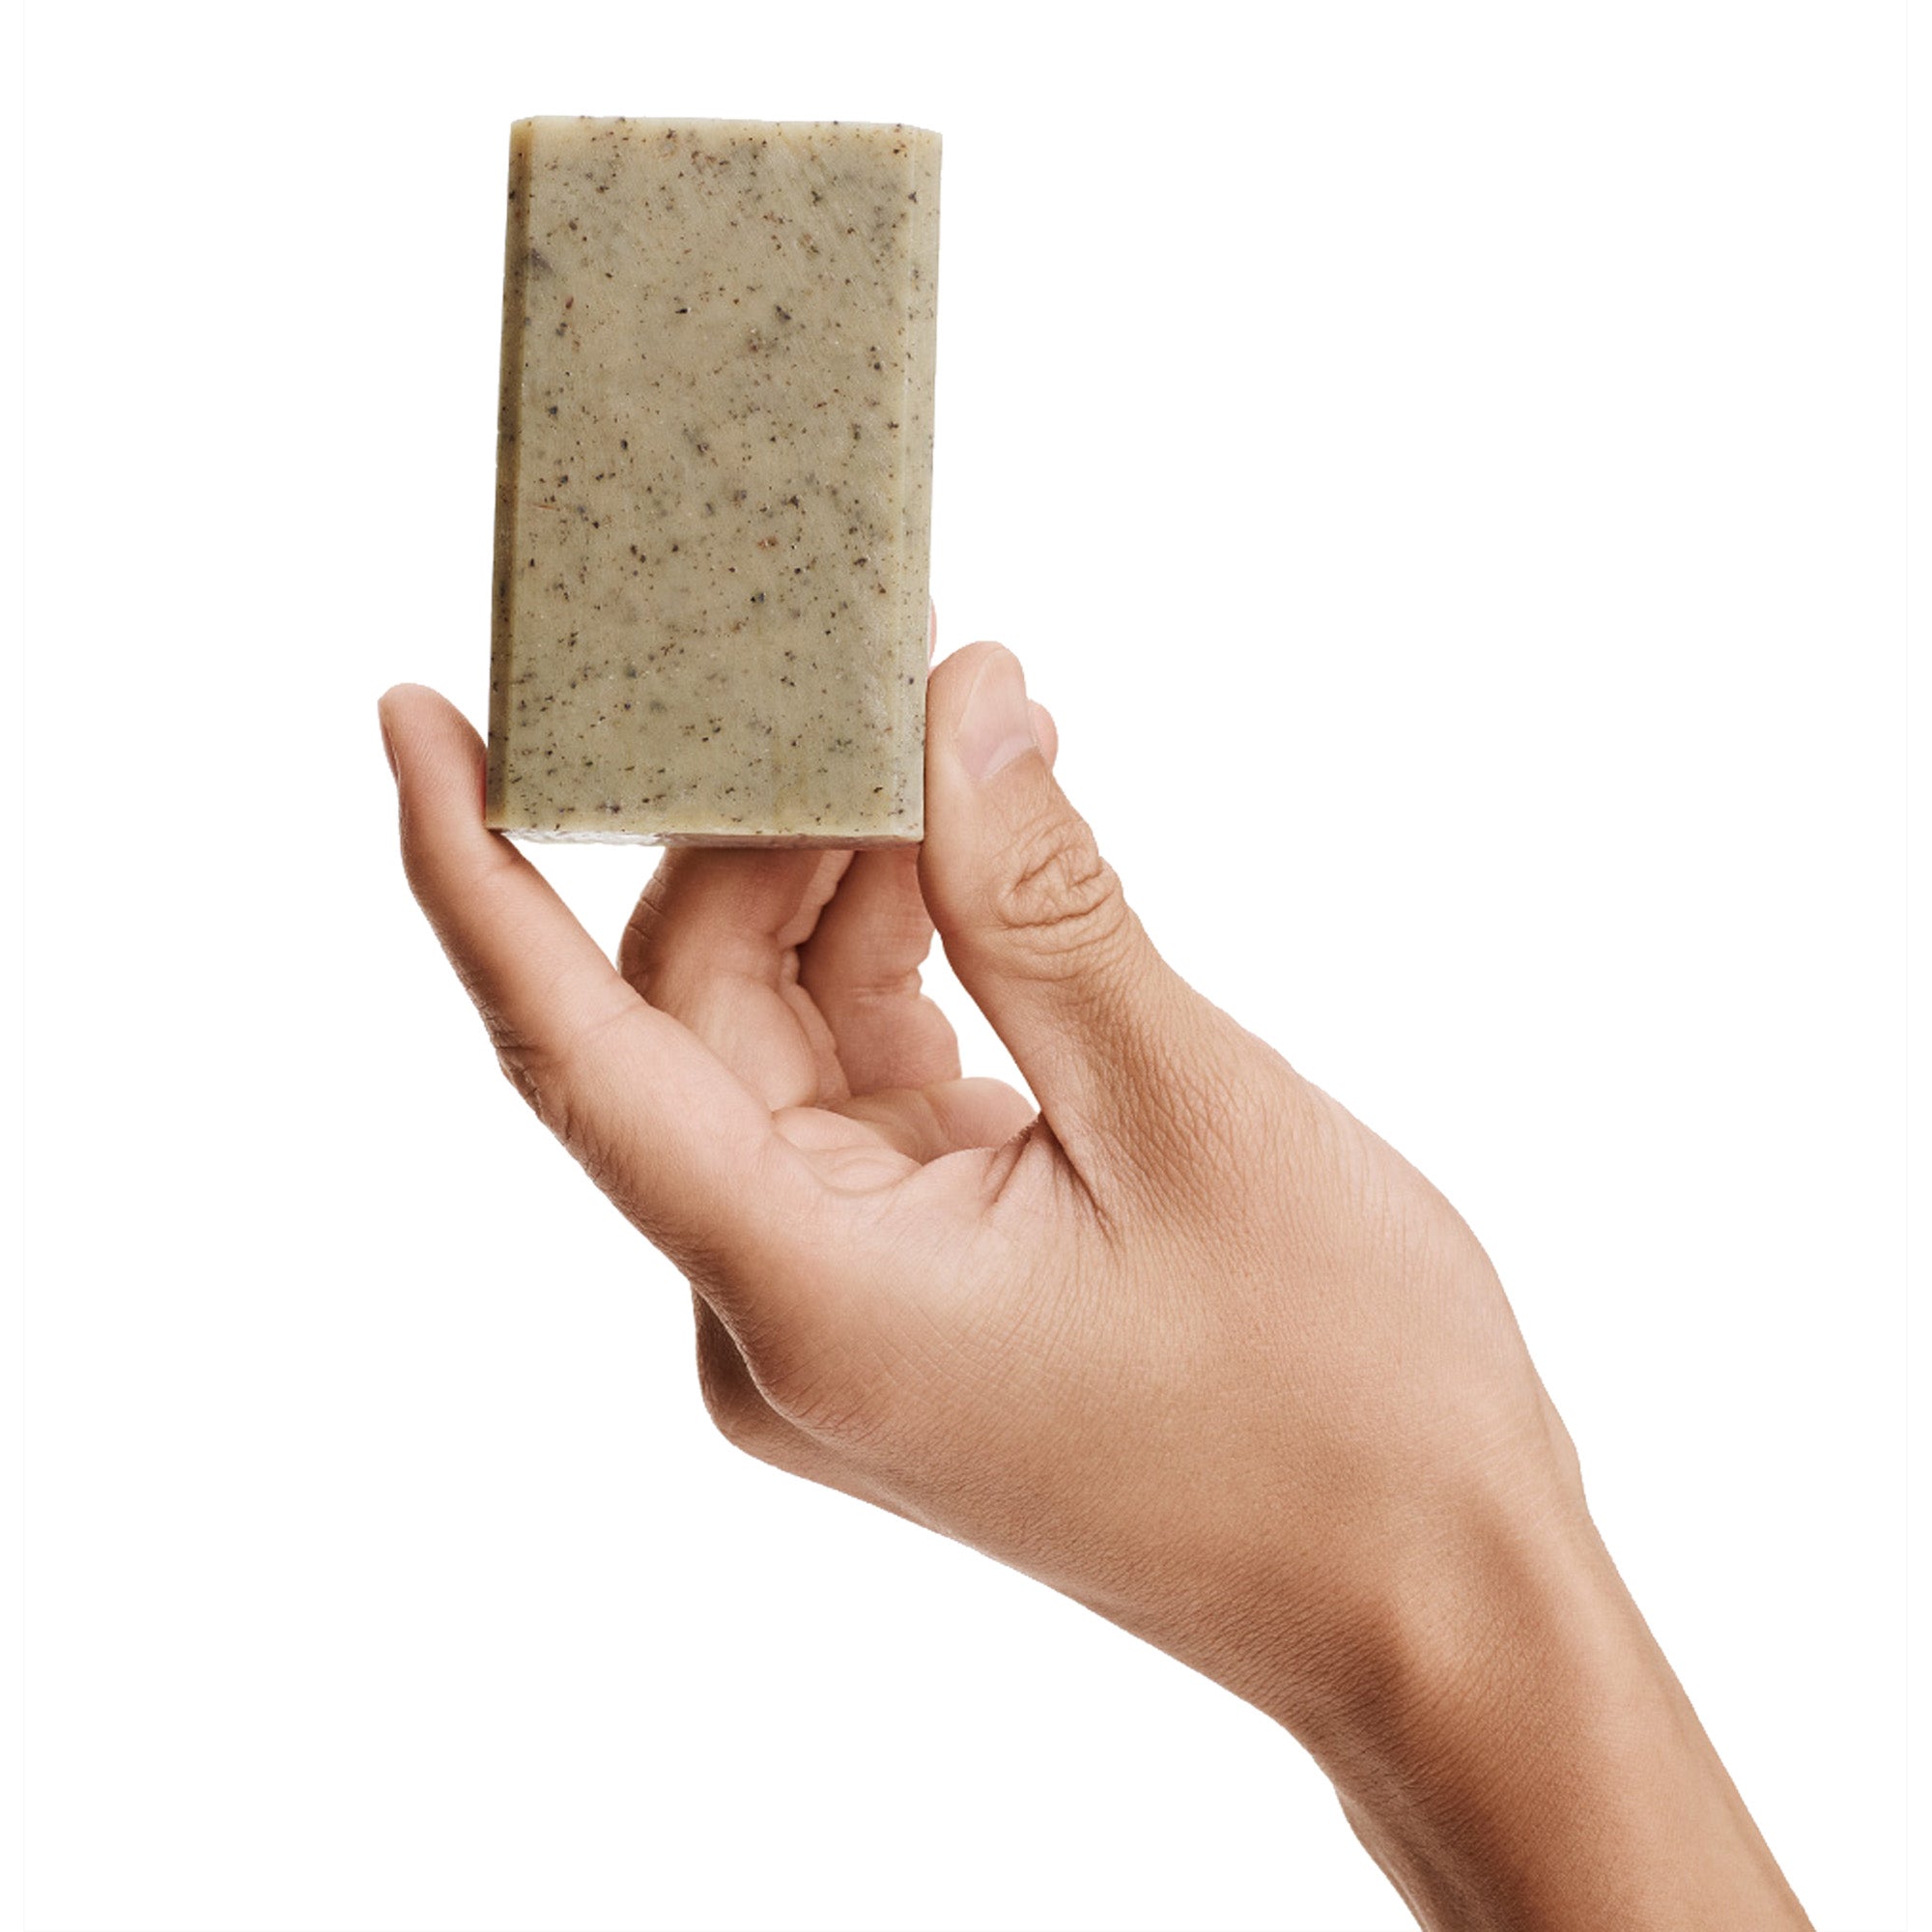 BIa balancing soap held in a hand.